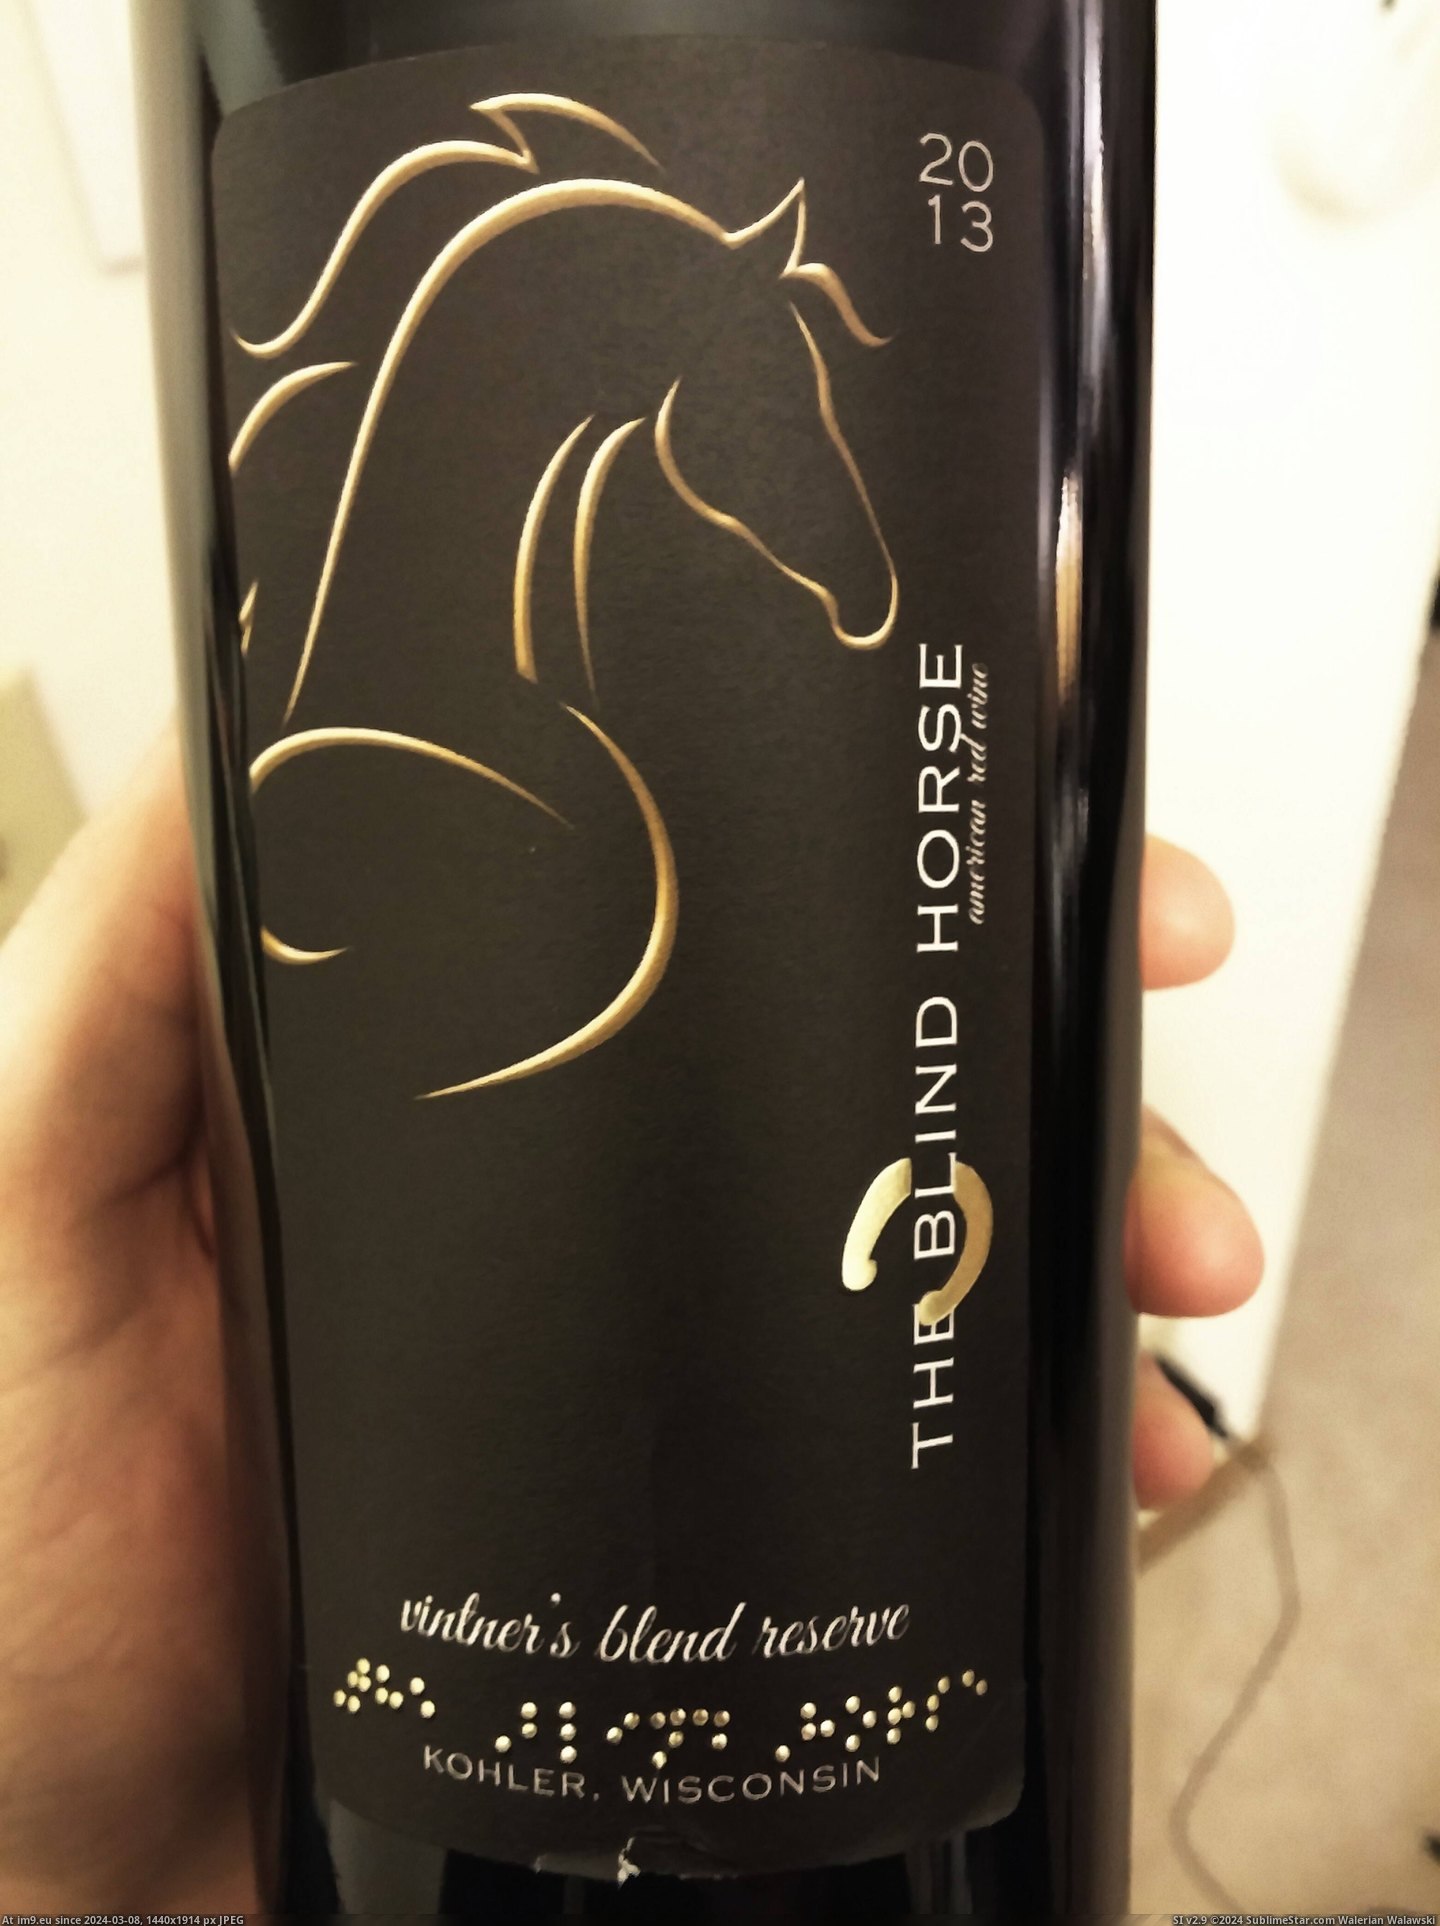 #Honor #Bottle #Horse #Actual #Label #Dots #Braille #Wine #Raised #Blind [Mildlyinteresting] This wine bottle label has actual raised Braille dots to honor the name of the winery, 'The Blind Horse.' Pic. (Изображение из альбом My r/MILDLYINTERESTING favs))